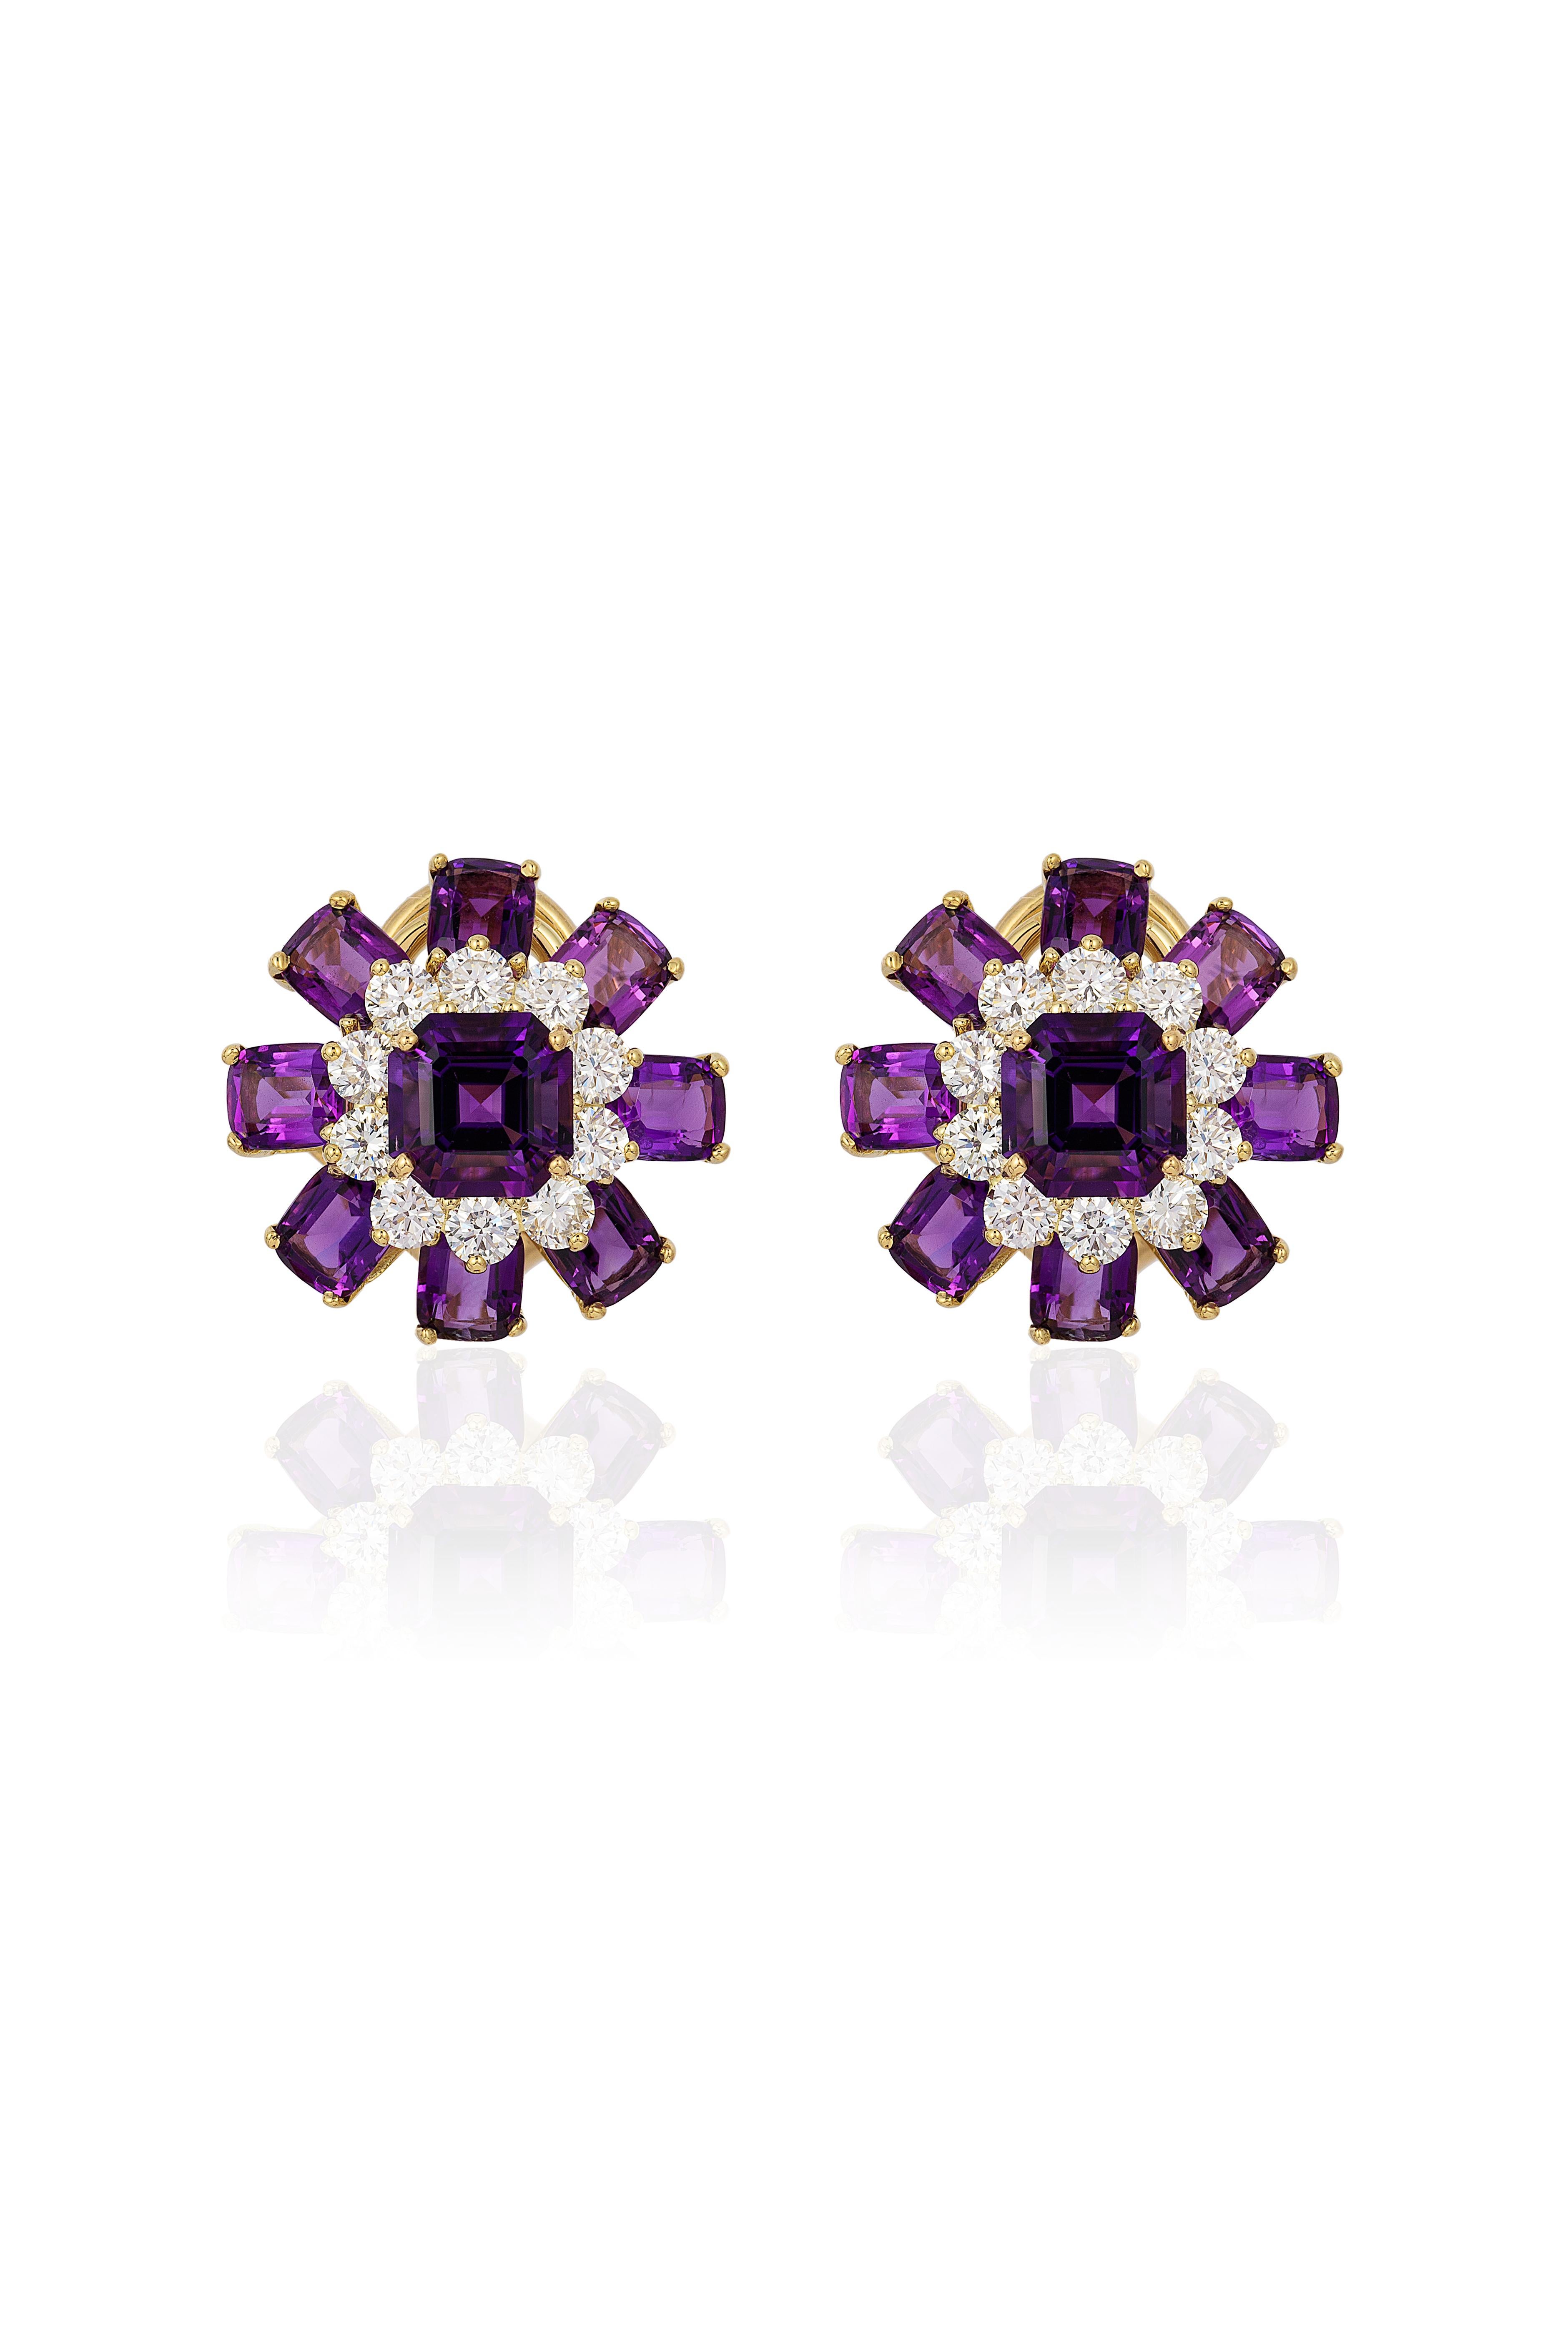 Contemporary Goshwara Amethyst Asscher & Cushion Cut with Diamond Earrings For Sale